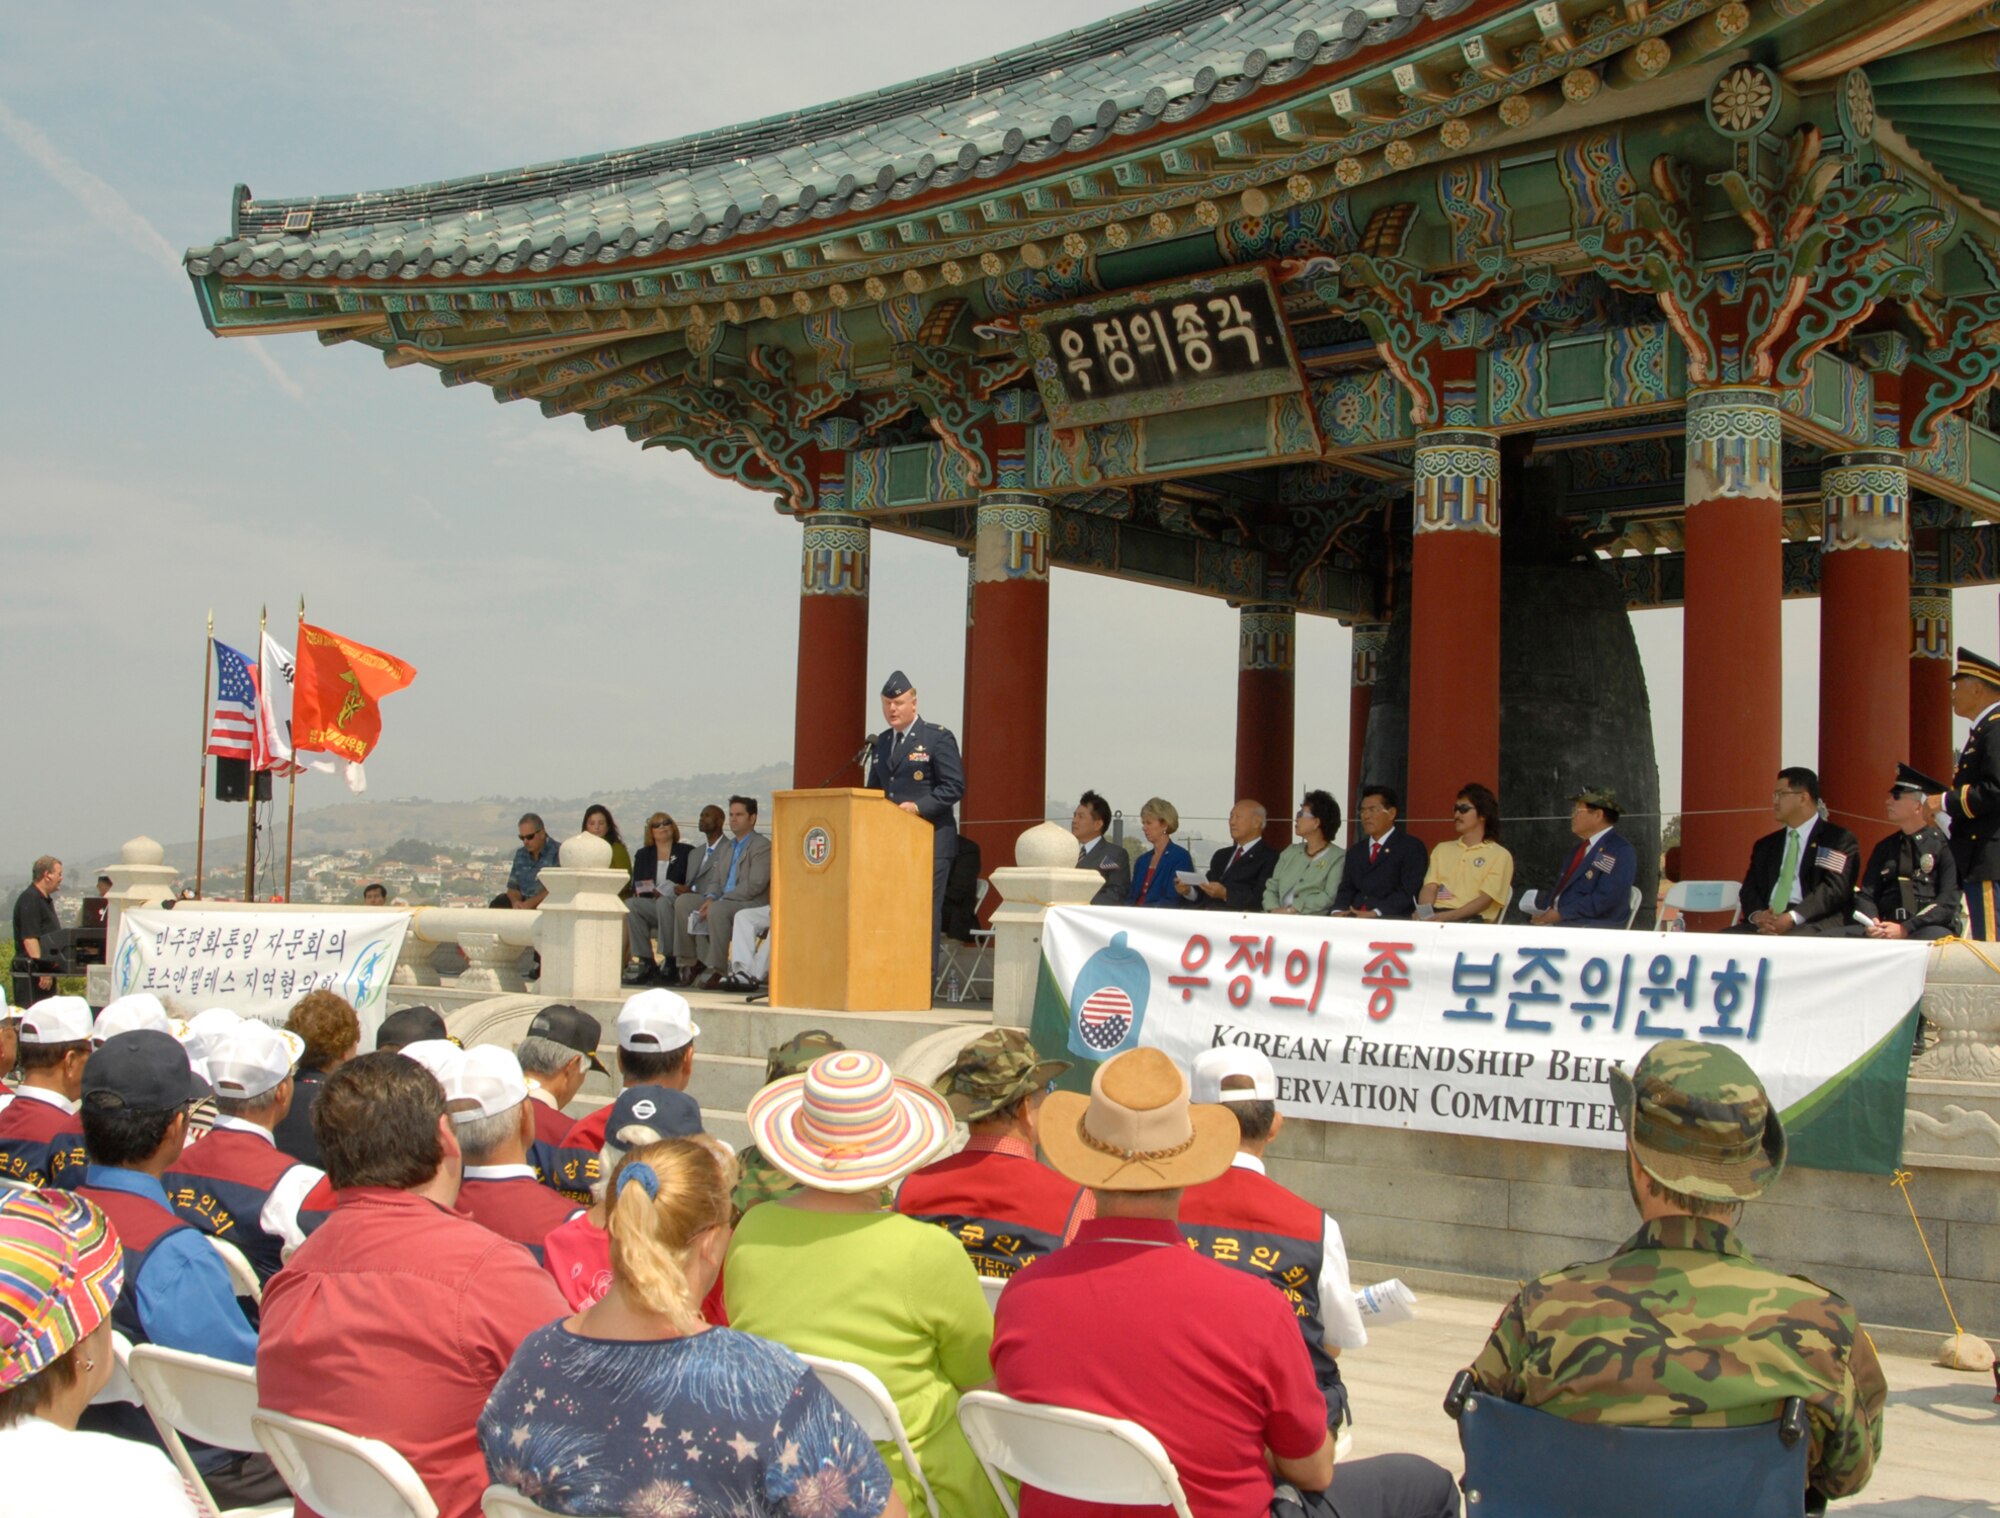 Col. Roger Teague, Space Based Infrared Systems Wing commander, addresses the San Pedro community during the 4th of July ceremony at the Korean Friendship Bell in San Pedro. (Photo by John Ryan)